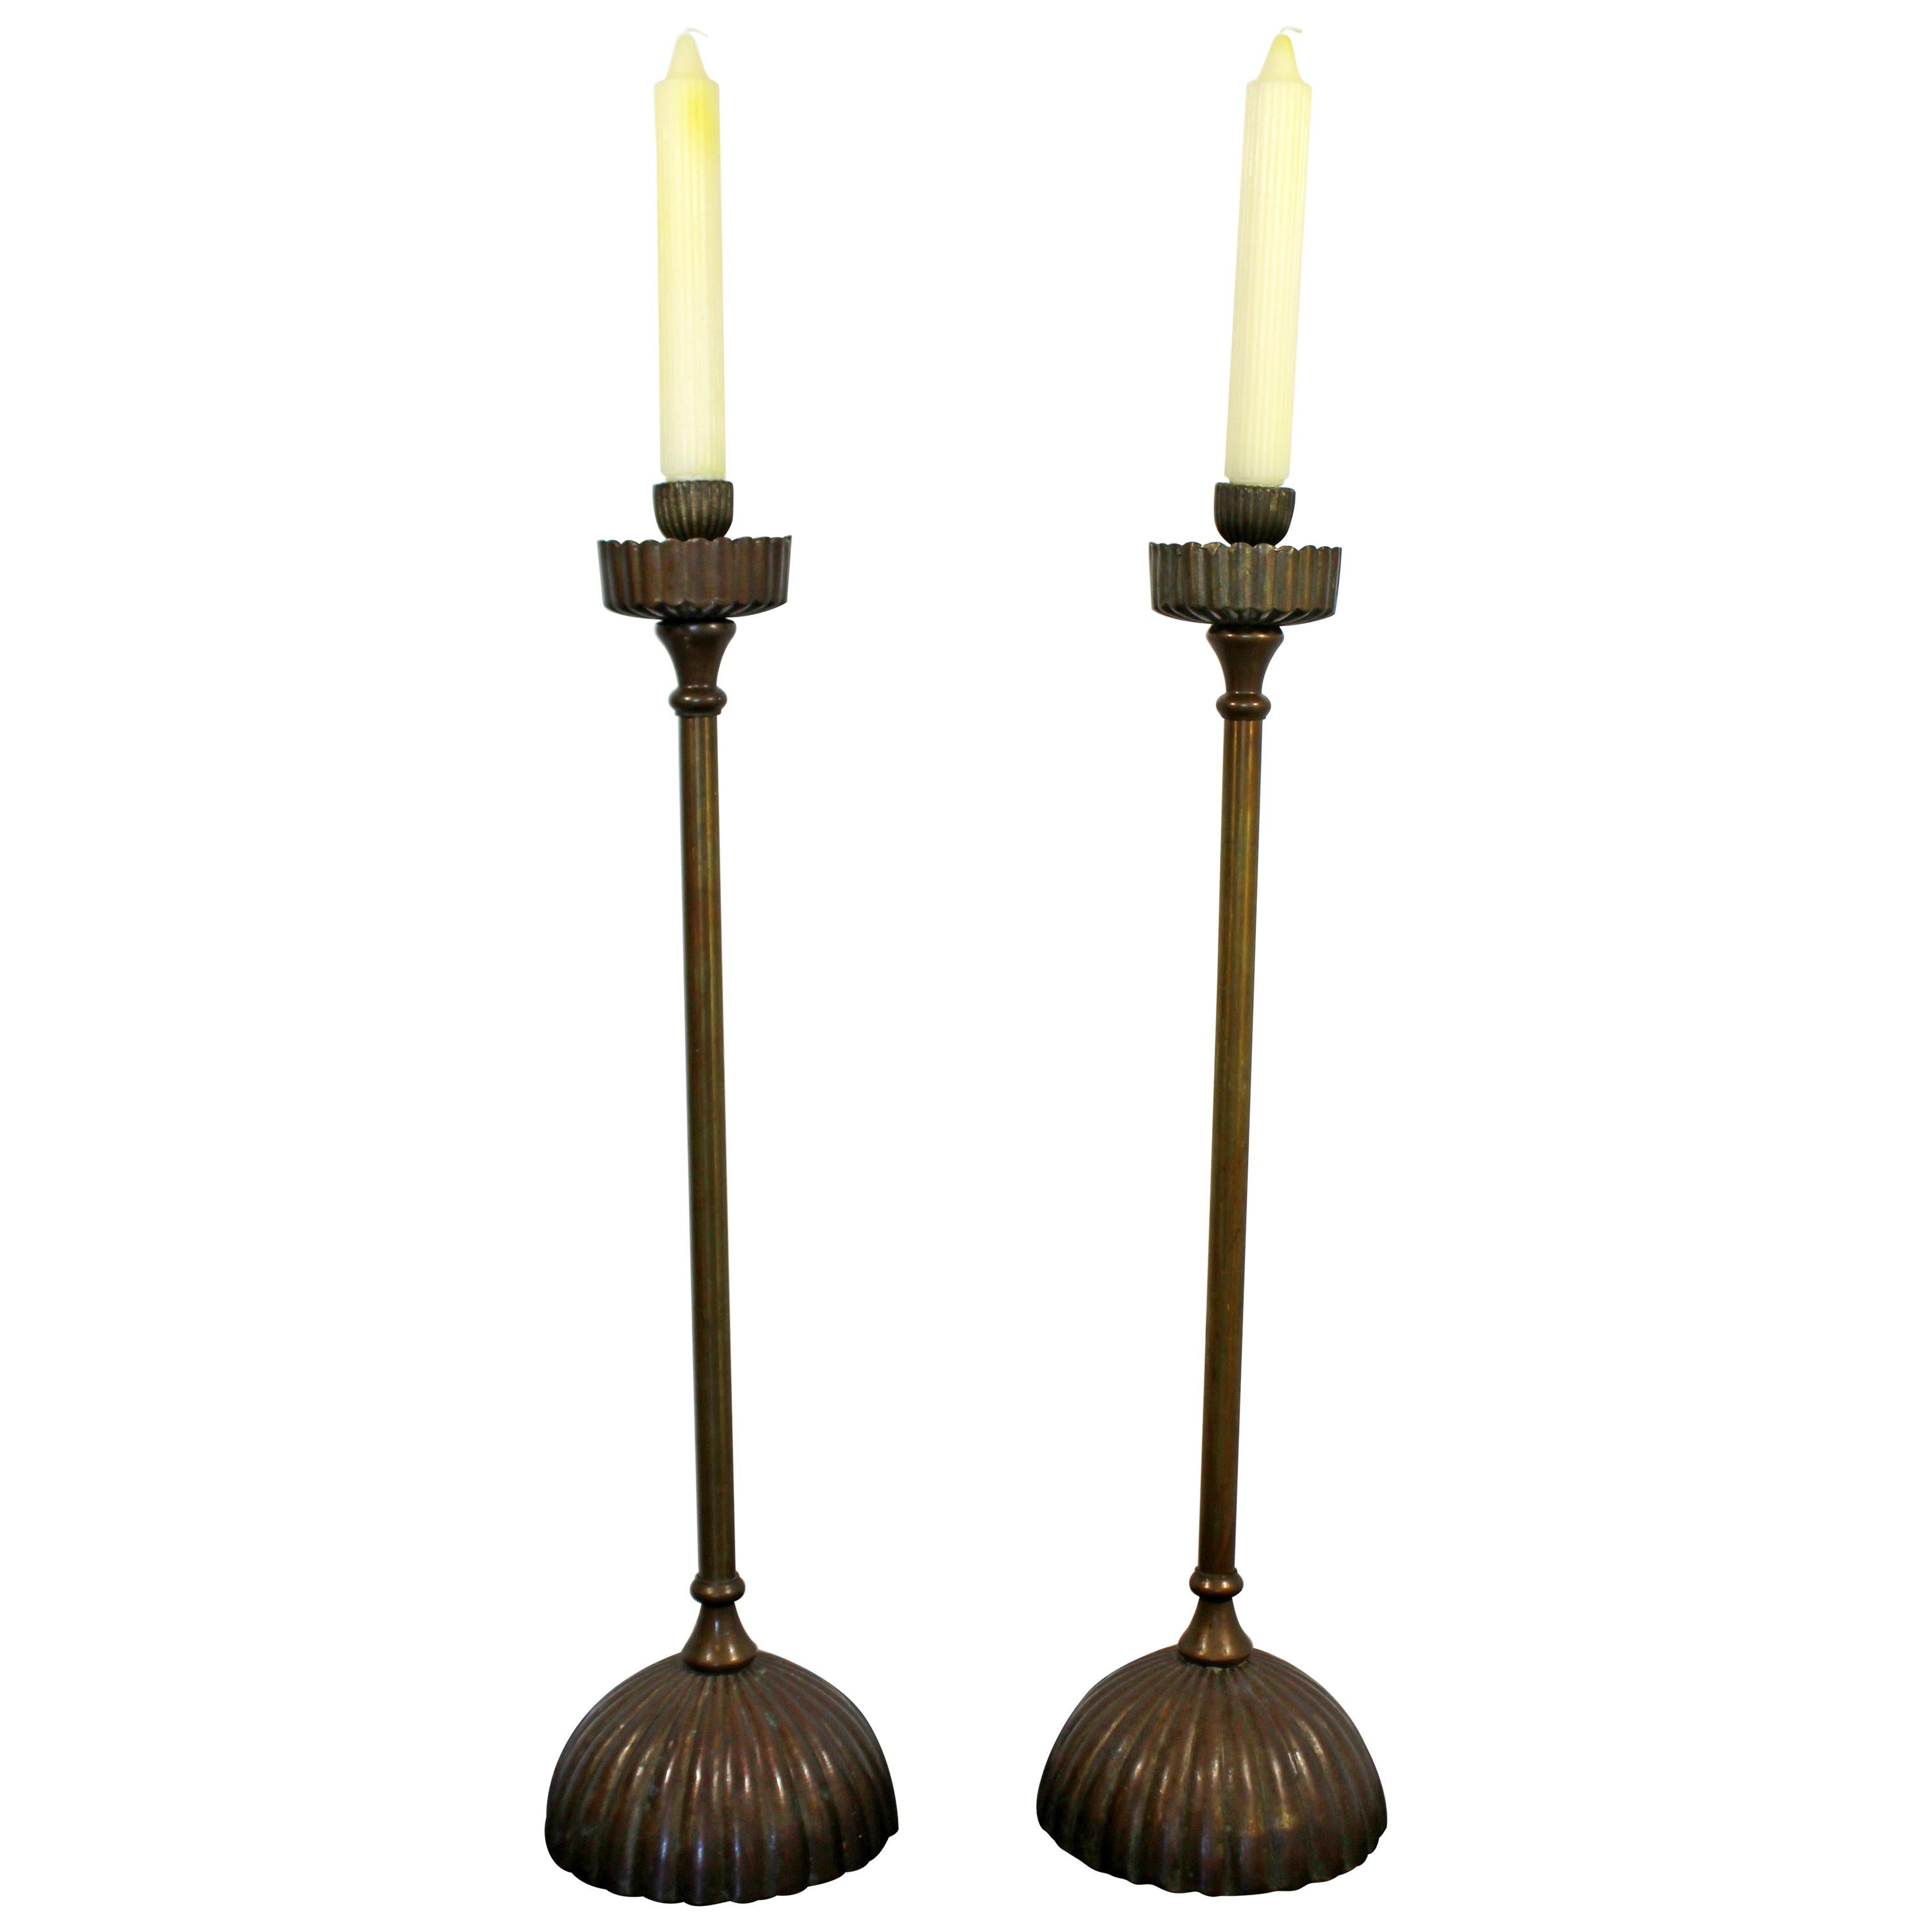 Art Deco Nouveau Pair of Tall Metal Candle Holders Tiffany Style